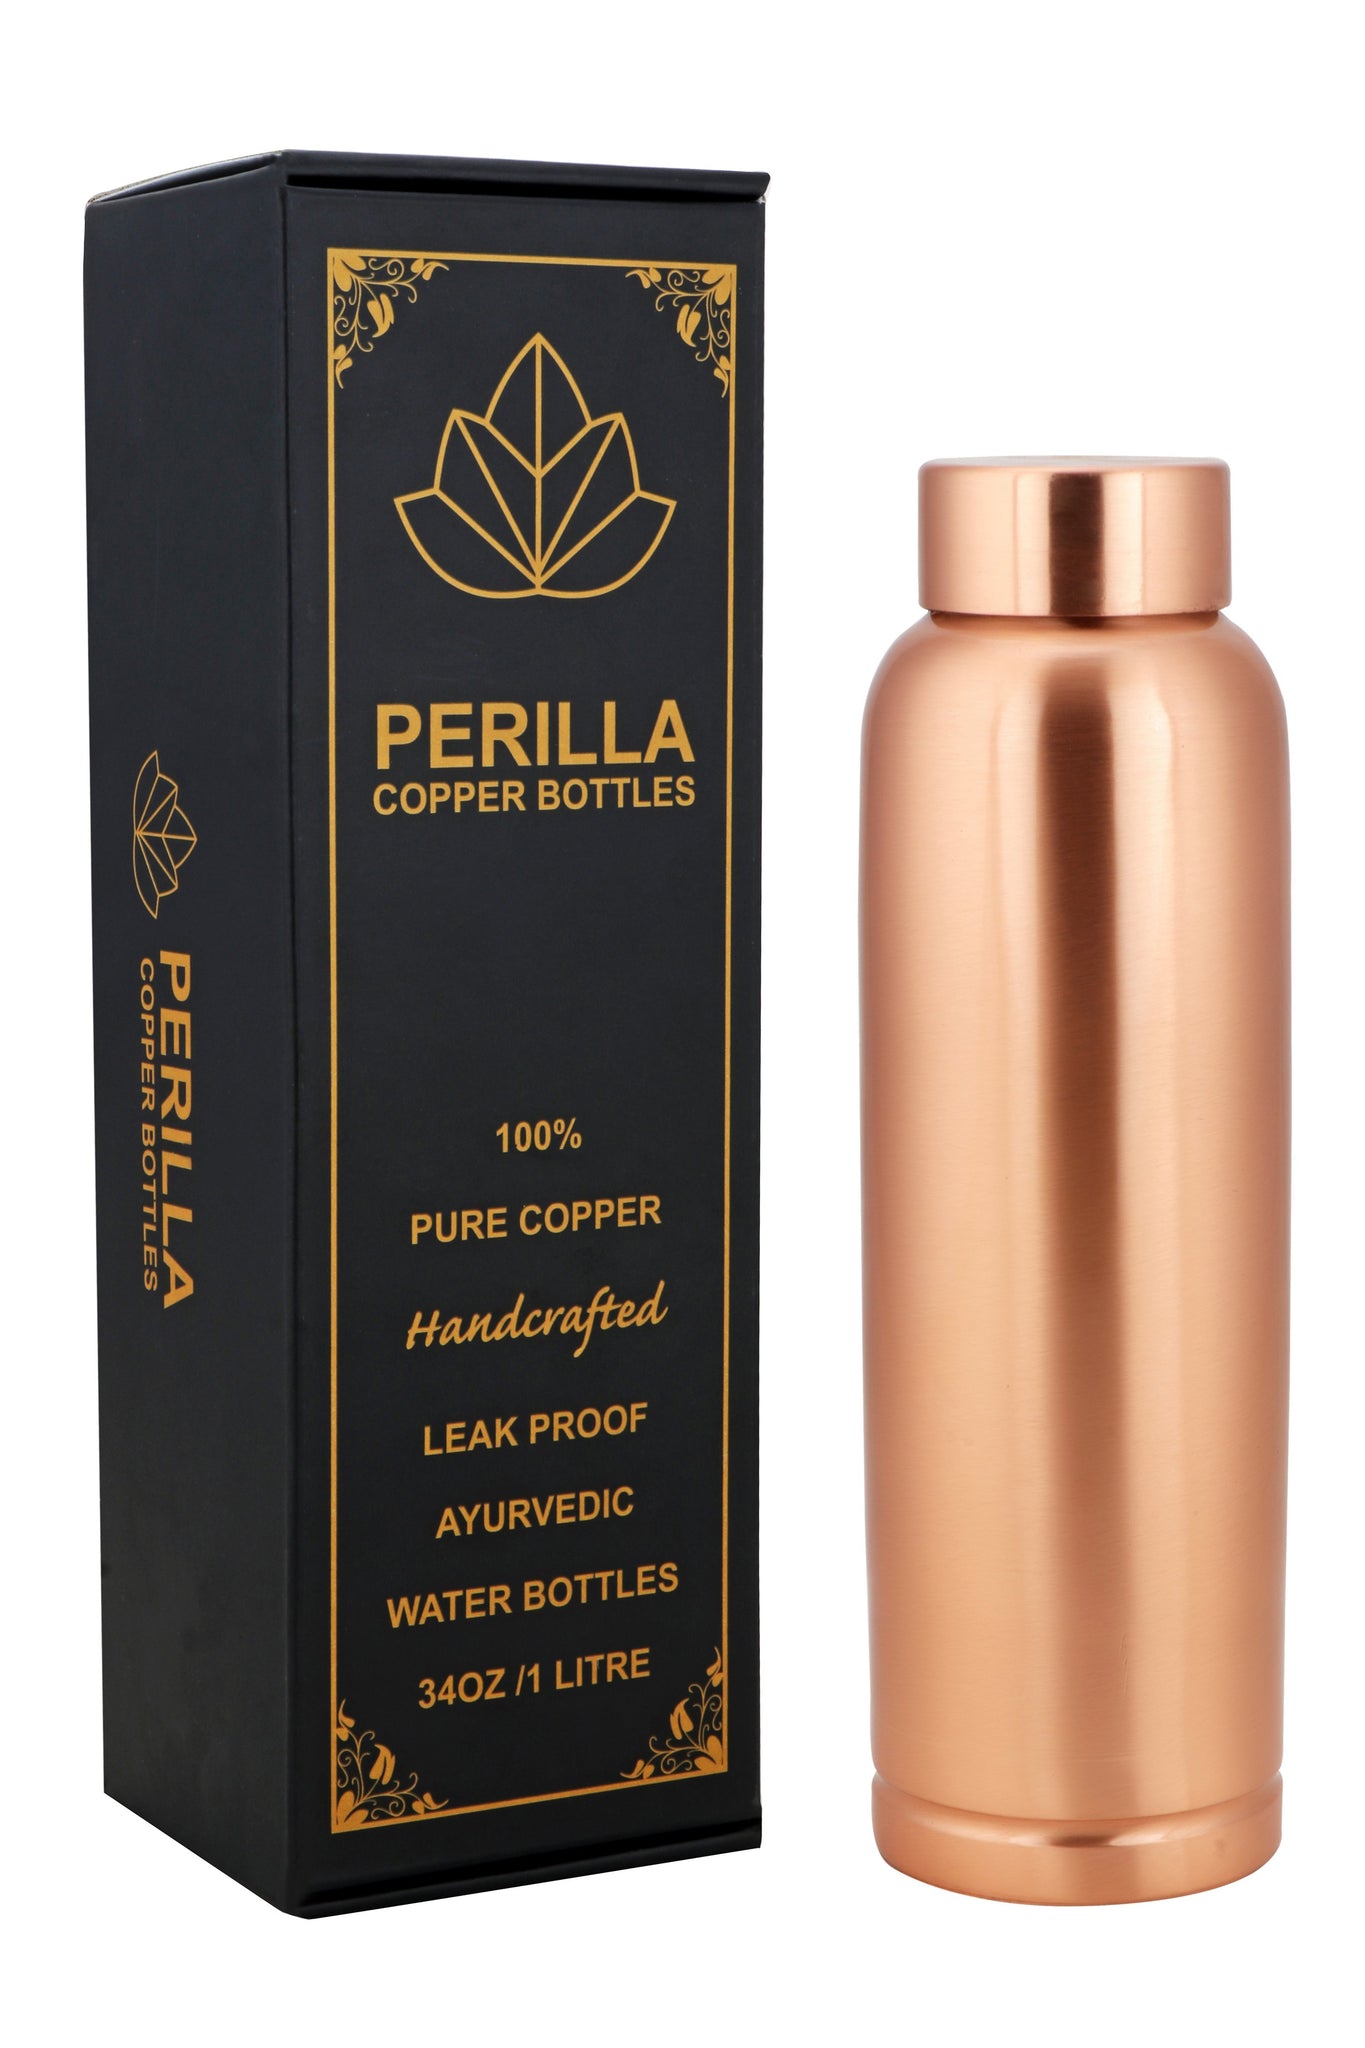 Copper Hot And Cold Water Bottle 750ml